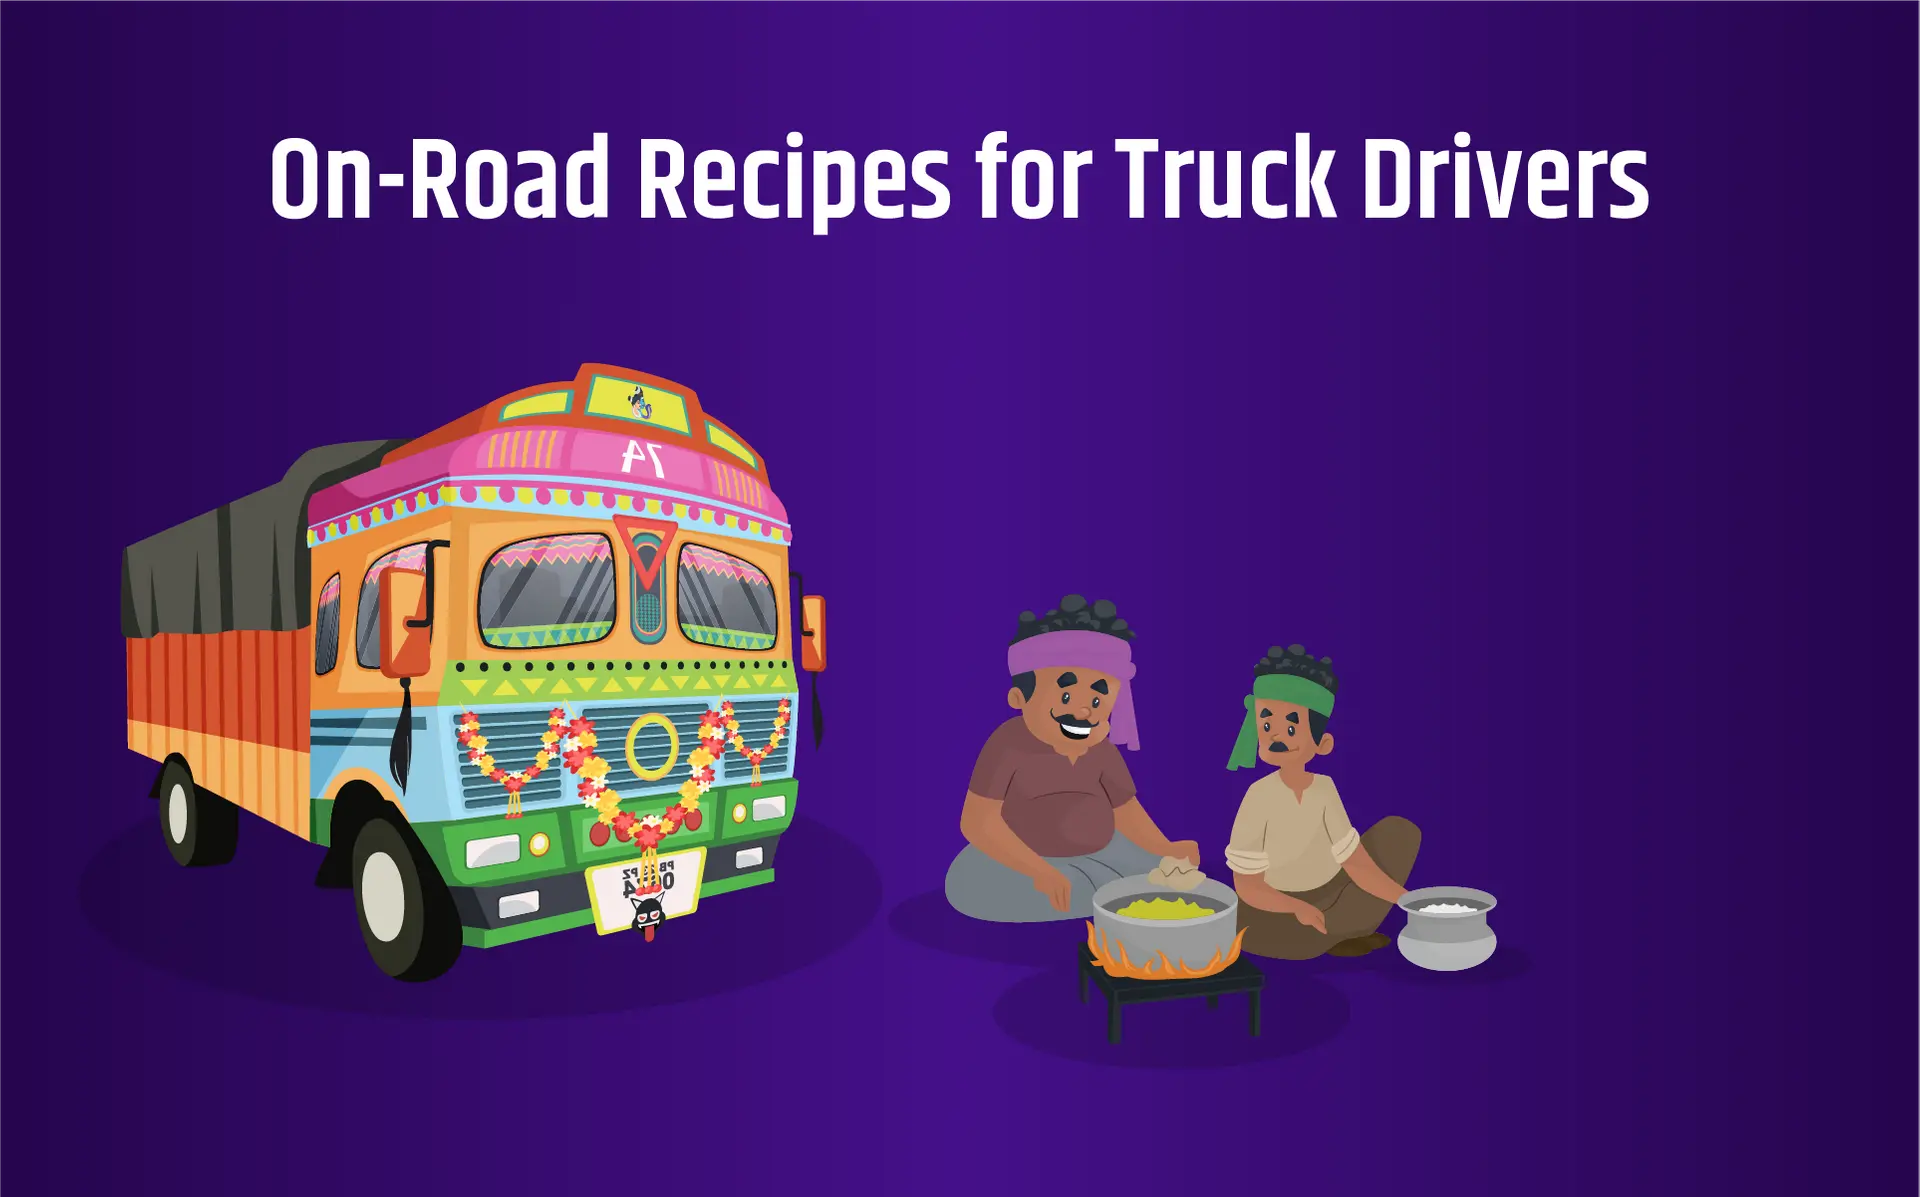 On-Road Recipes For Long-Haul Goods Transport Trips